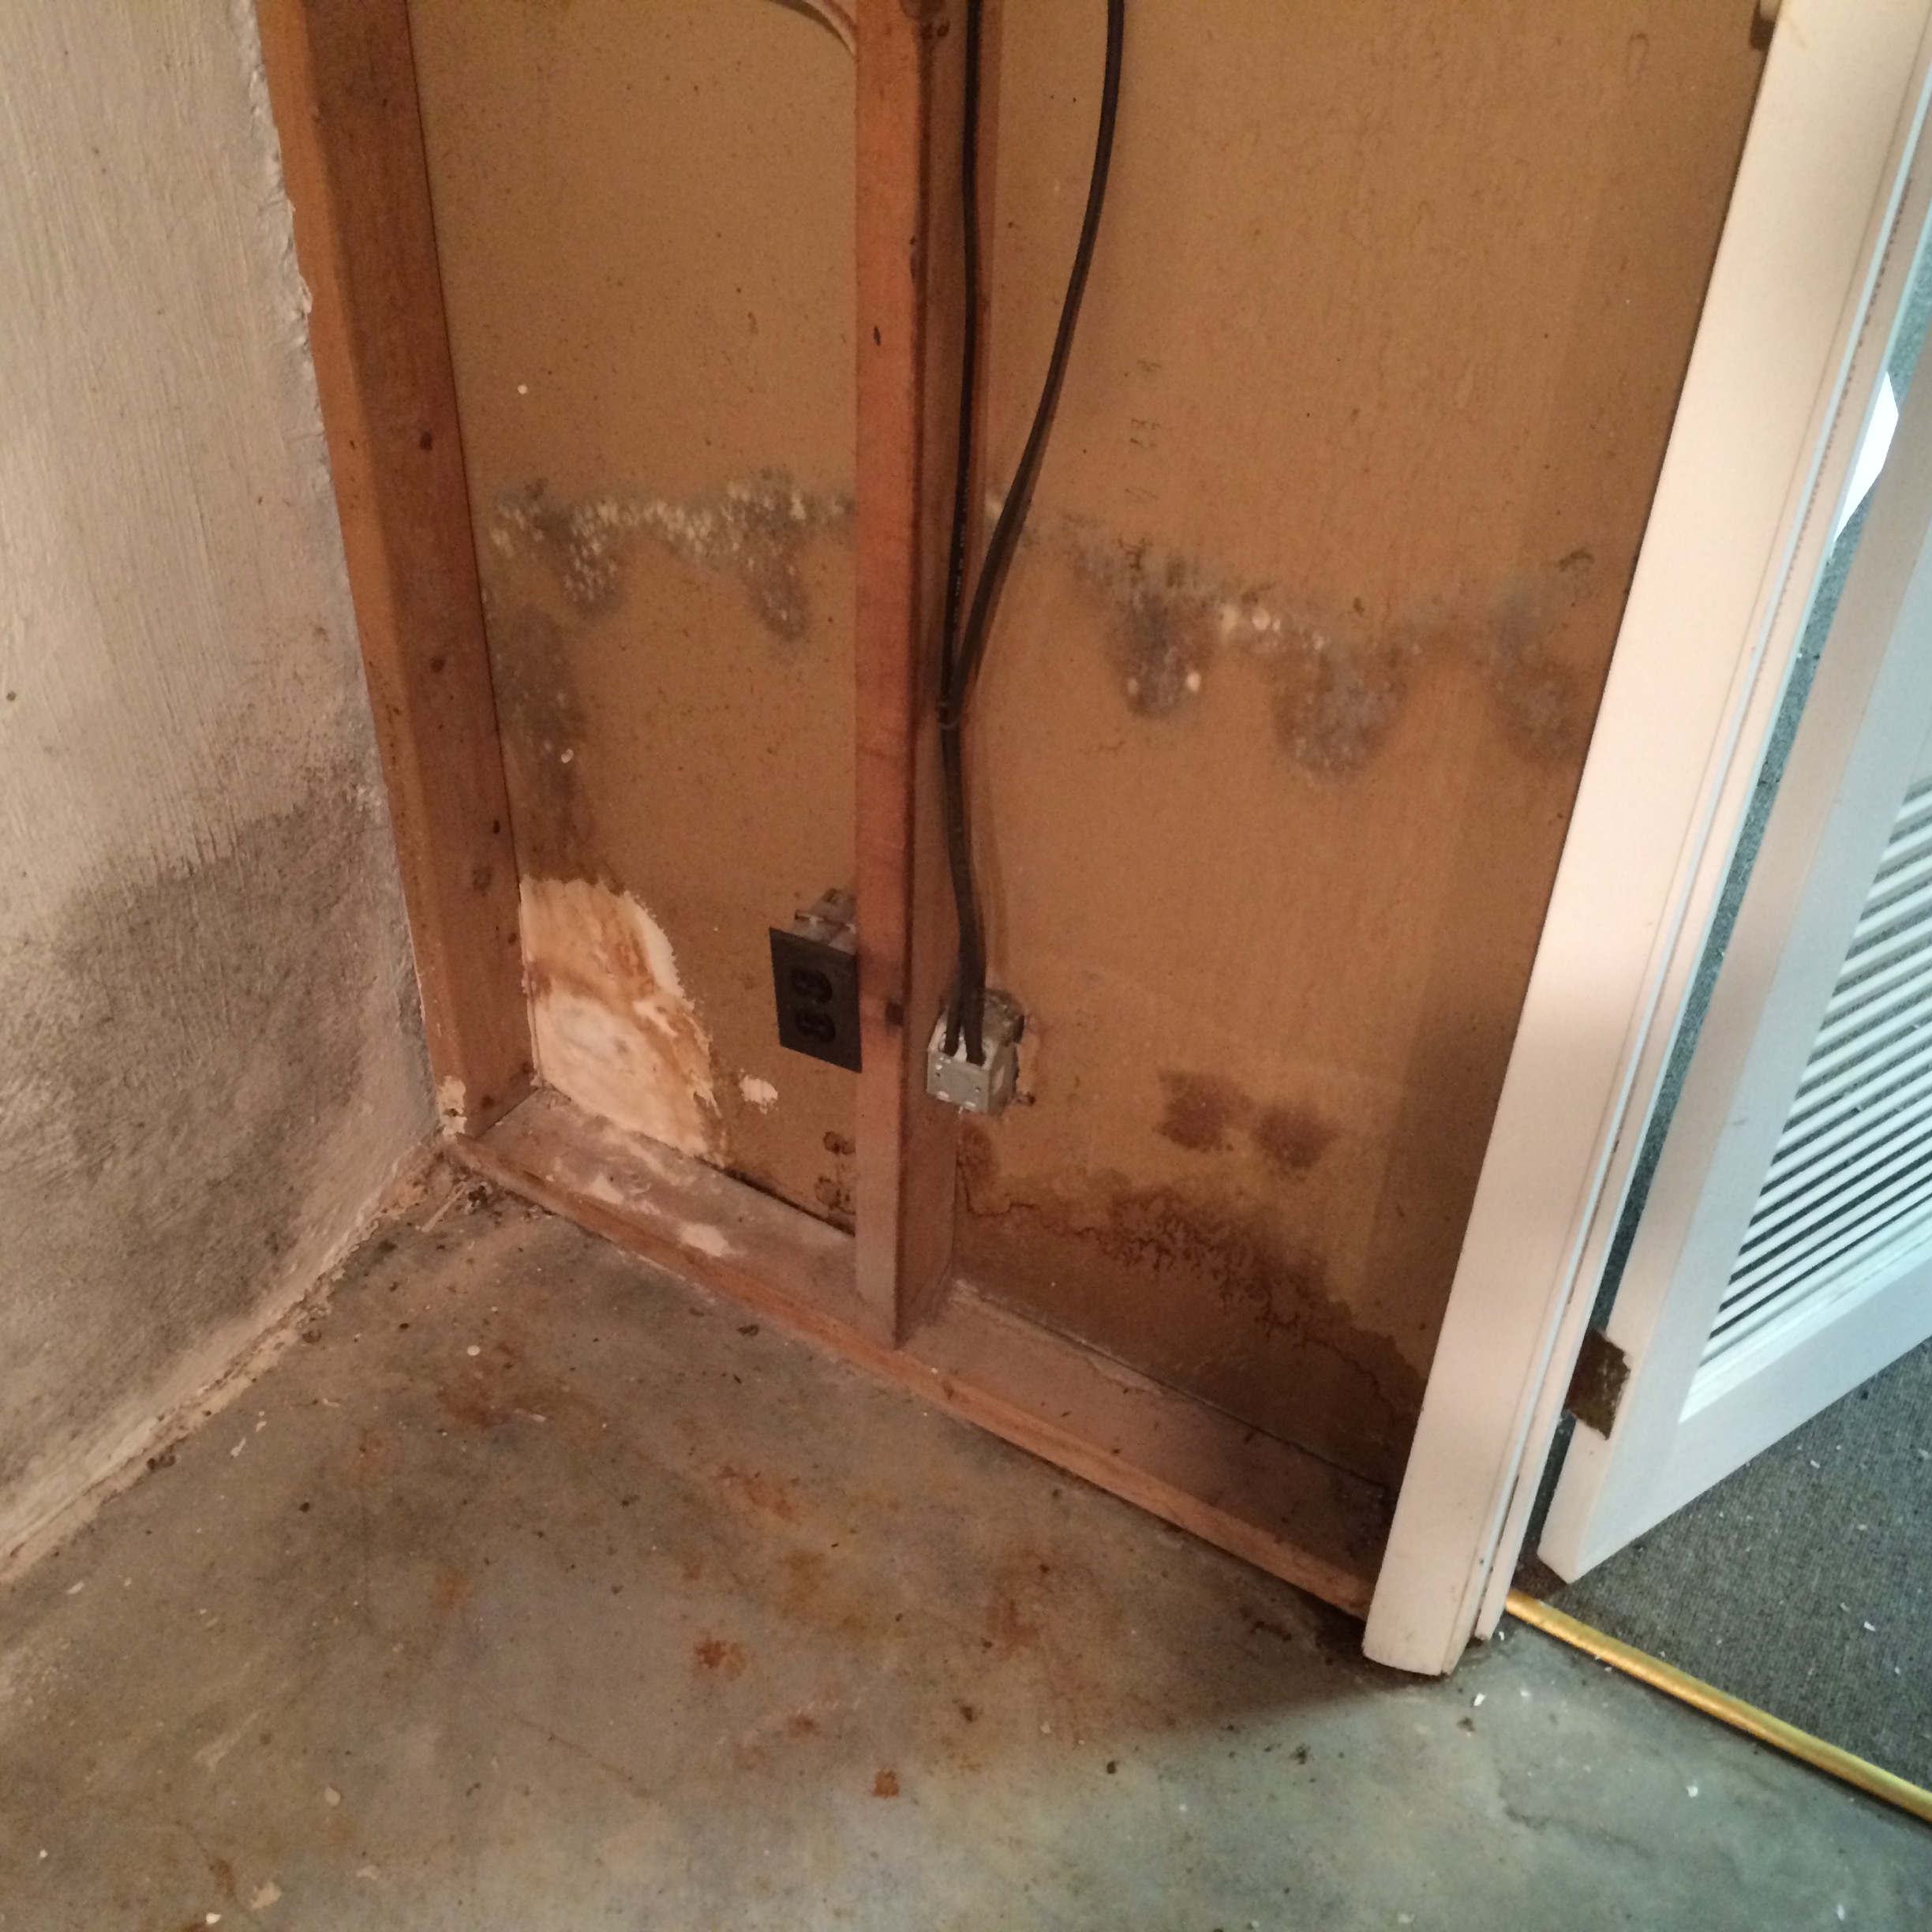 Got mold? Don't worry. SERVPRO can help with ANY size mold remediation.